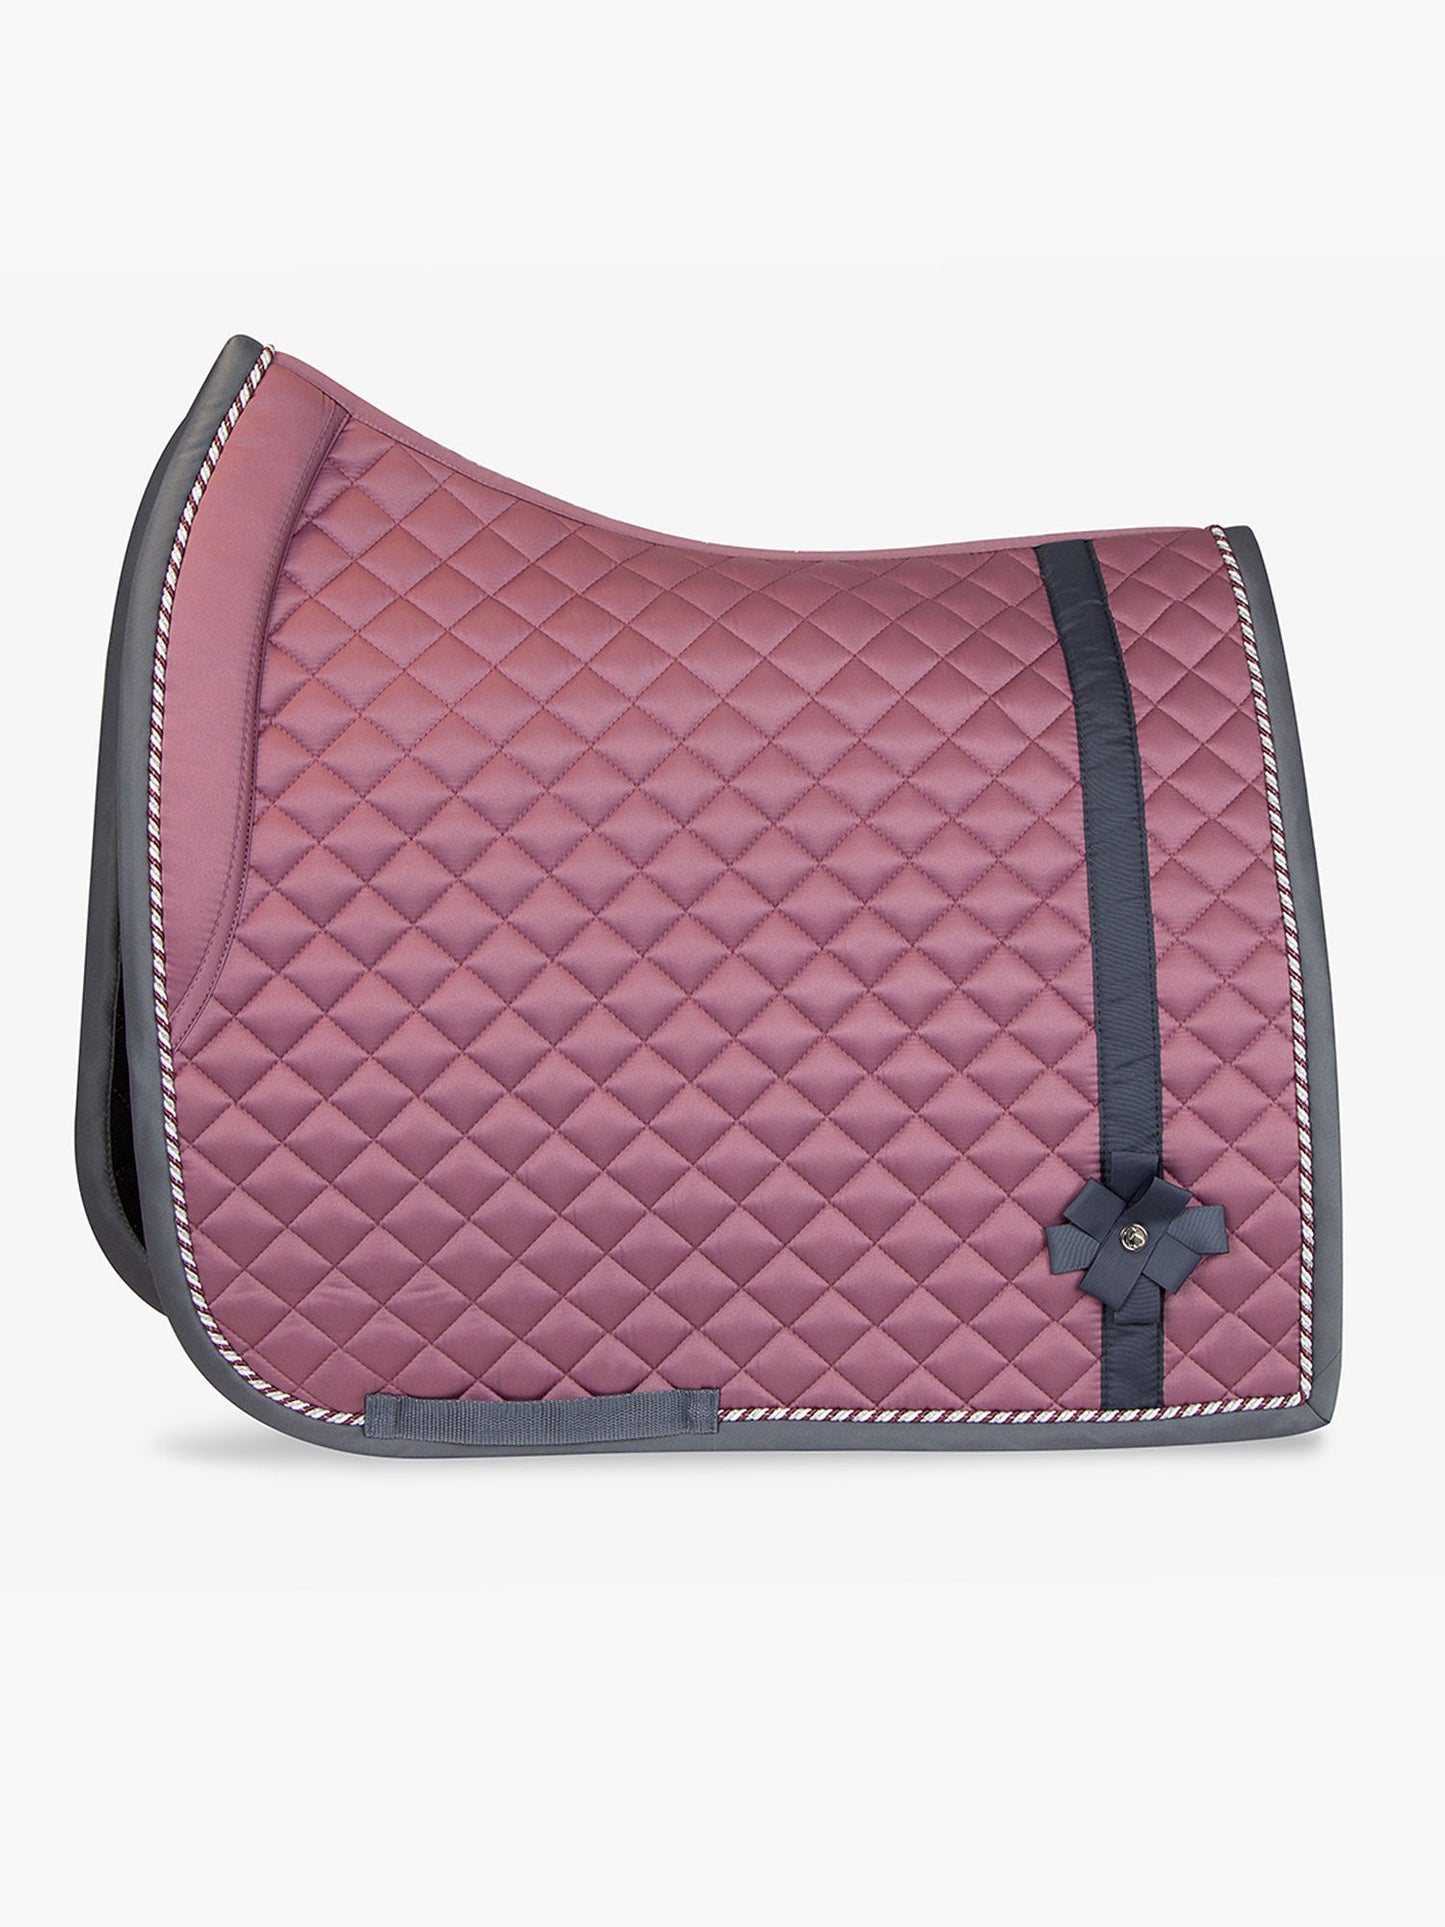 PS of Sweden Bow Saddle Pad Roseberry and Grey